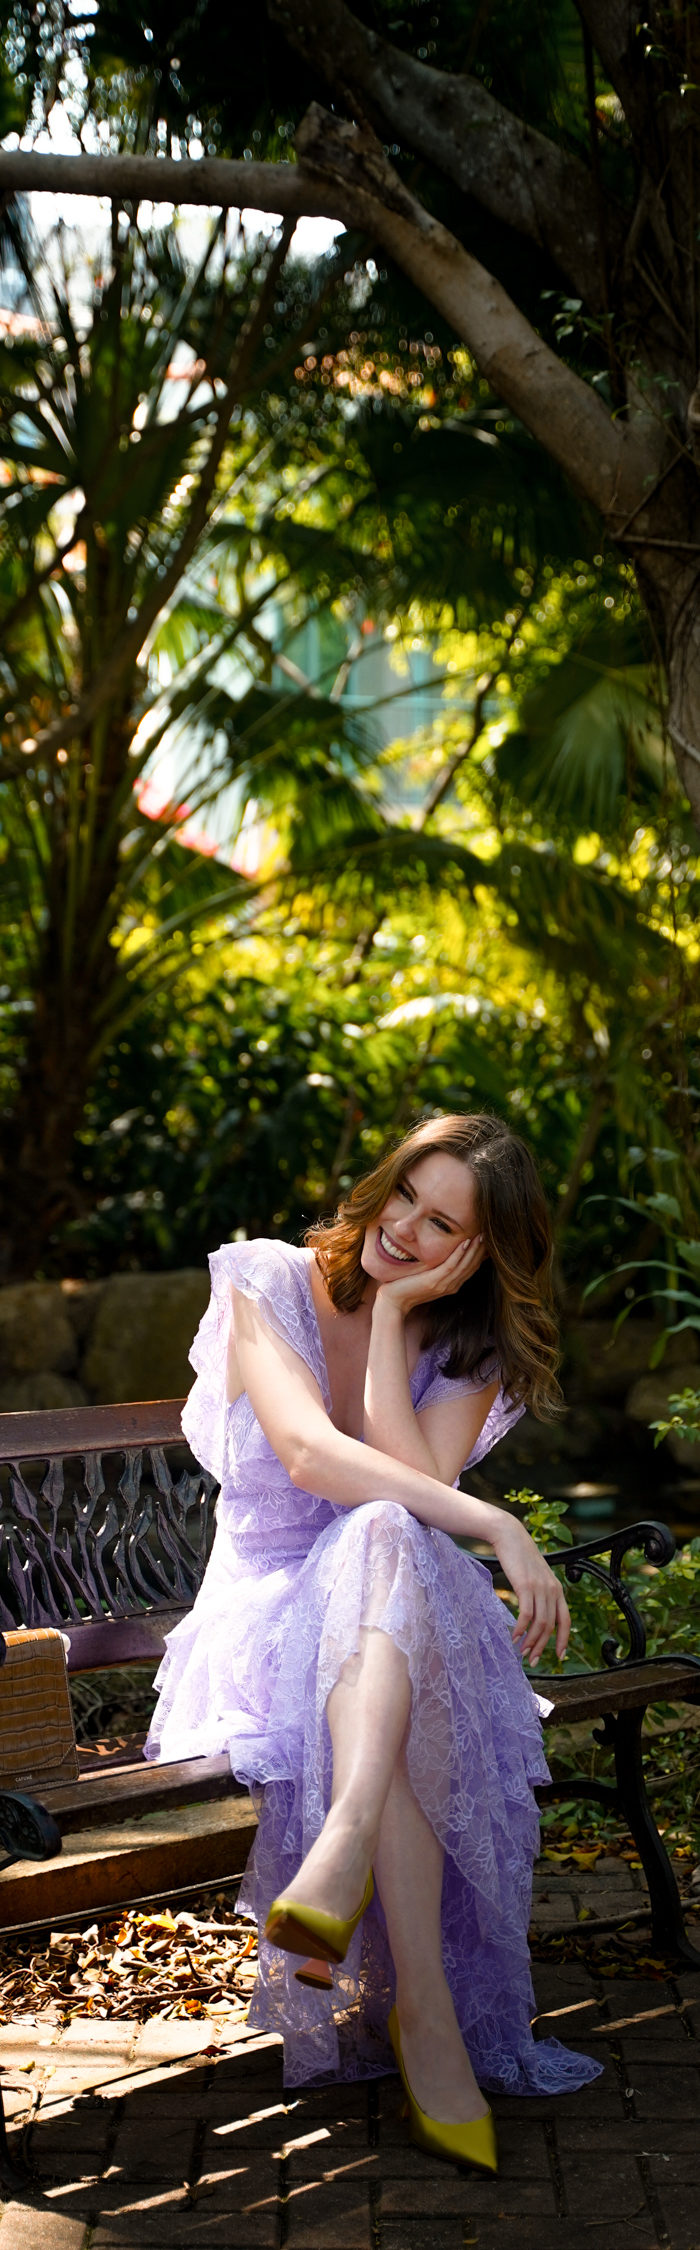 Miss USA 2011 Alyssa Campanella of The A List blog shares springtime colors of lilac and green